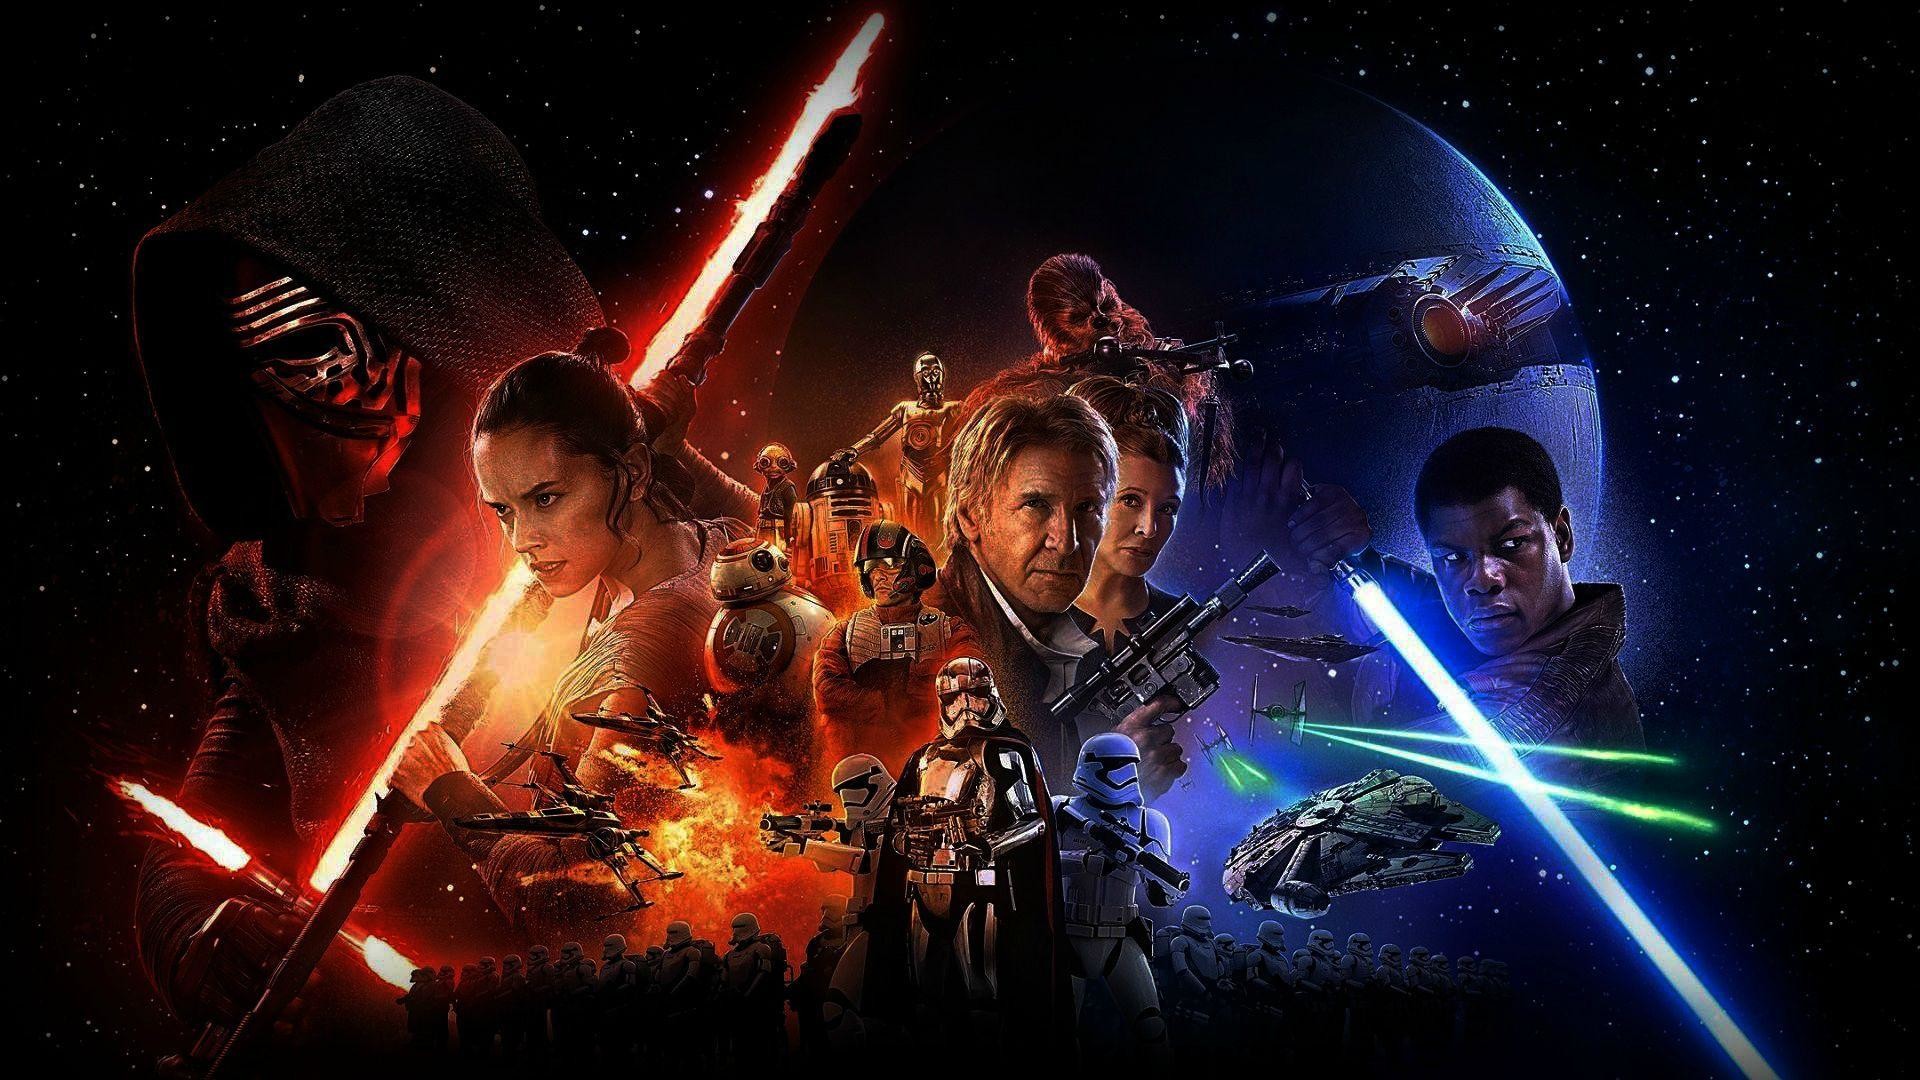 1920x1080 Star Wars - The Force Awakens Poster [1920 x 1080] : wallpapers